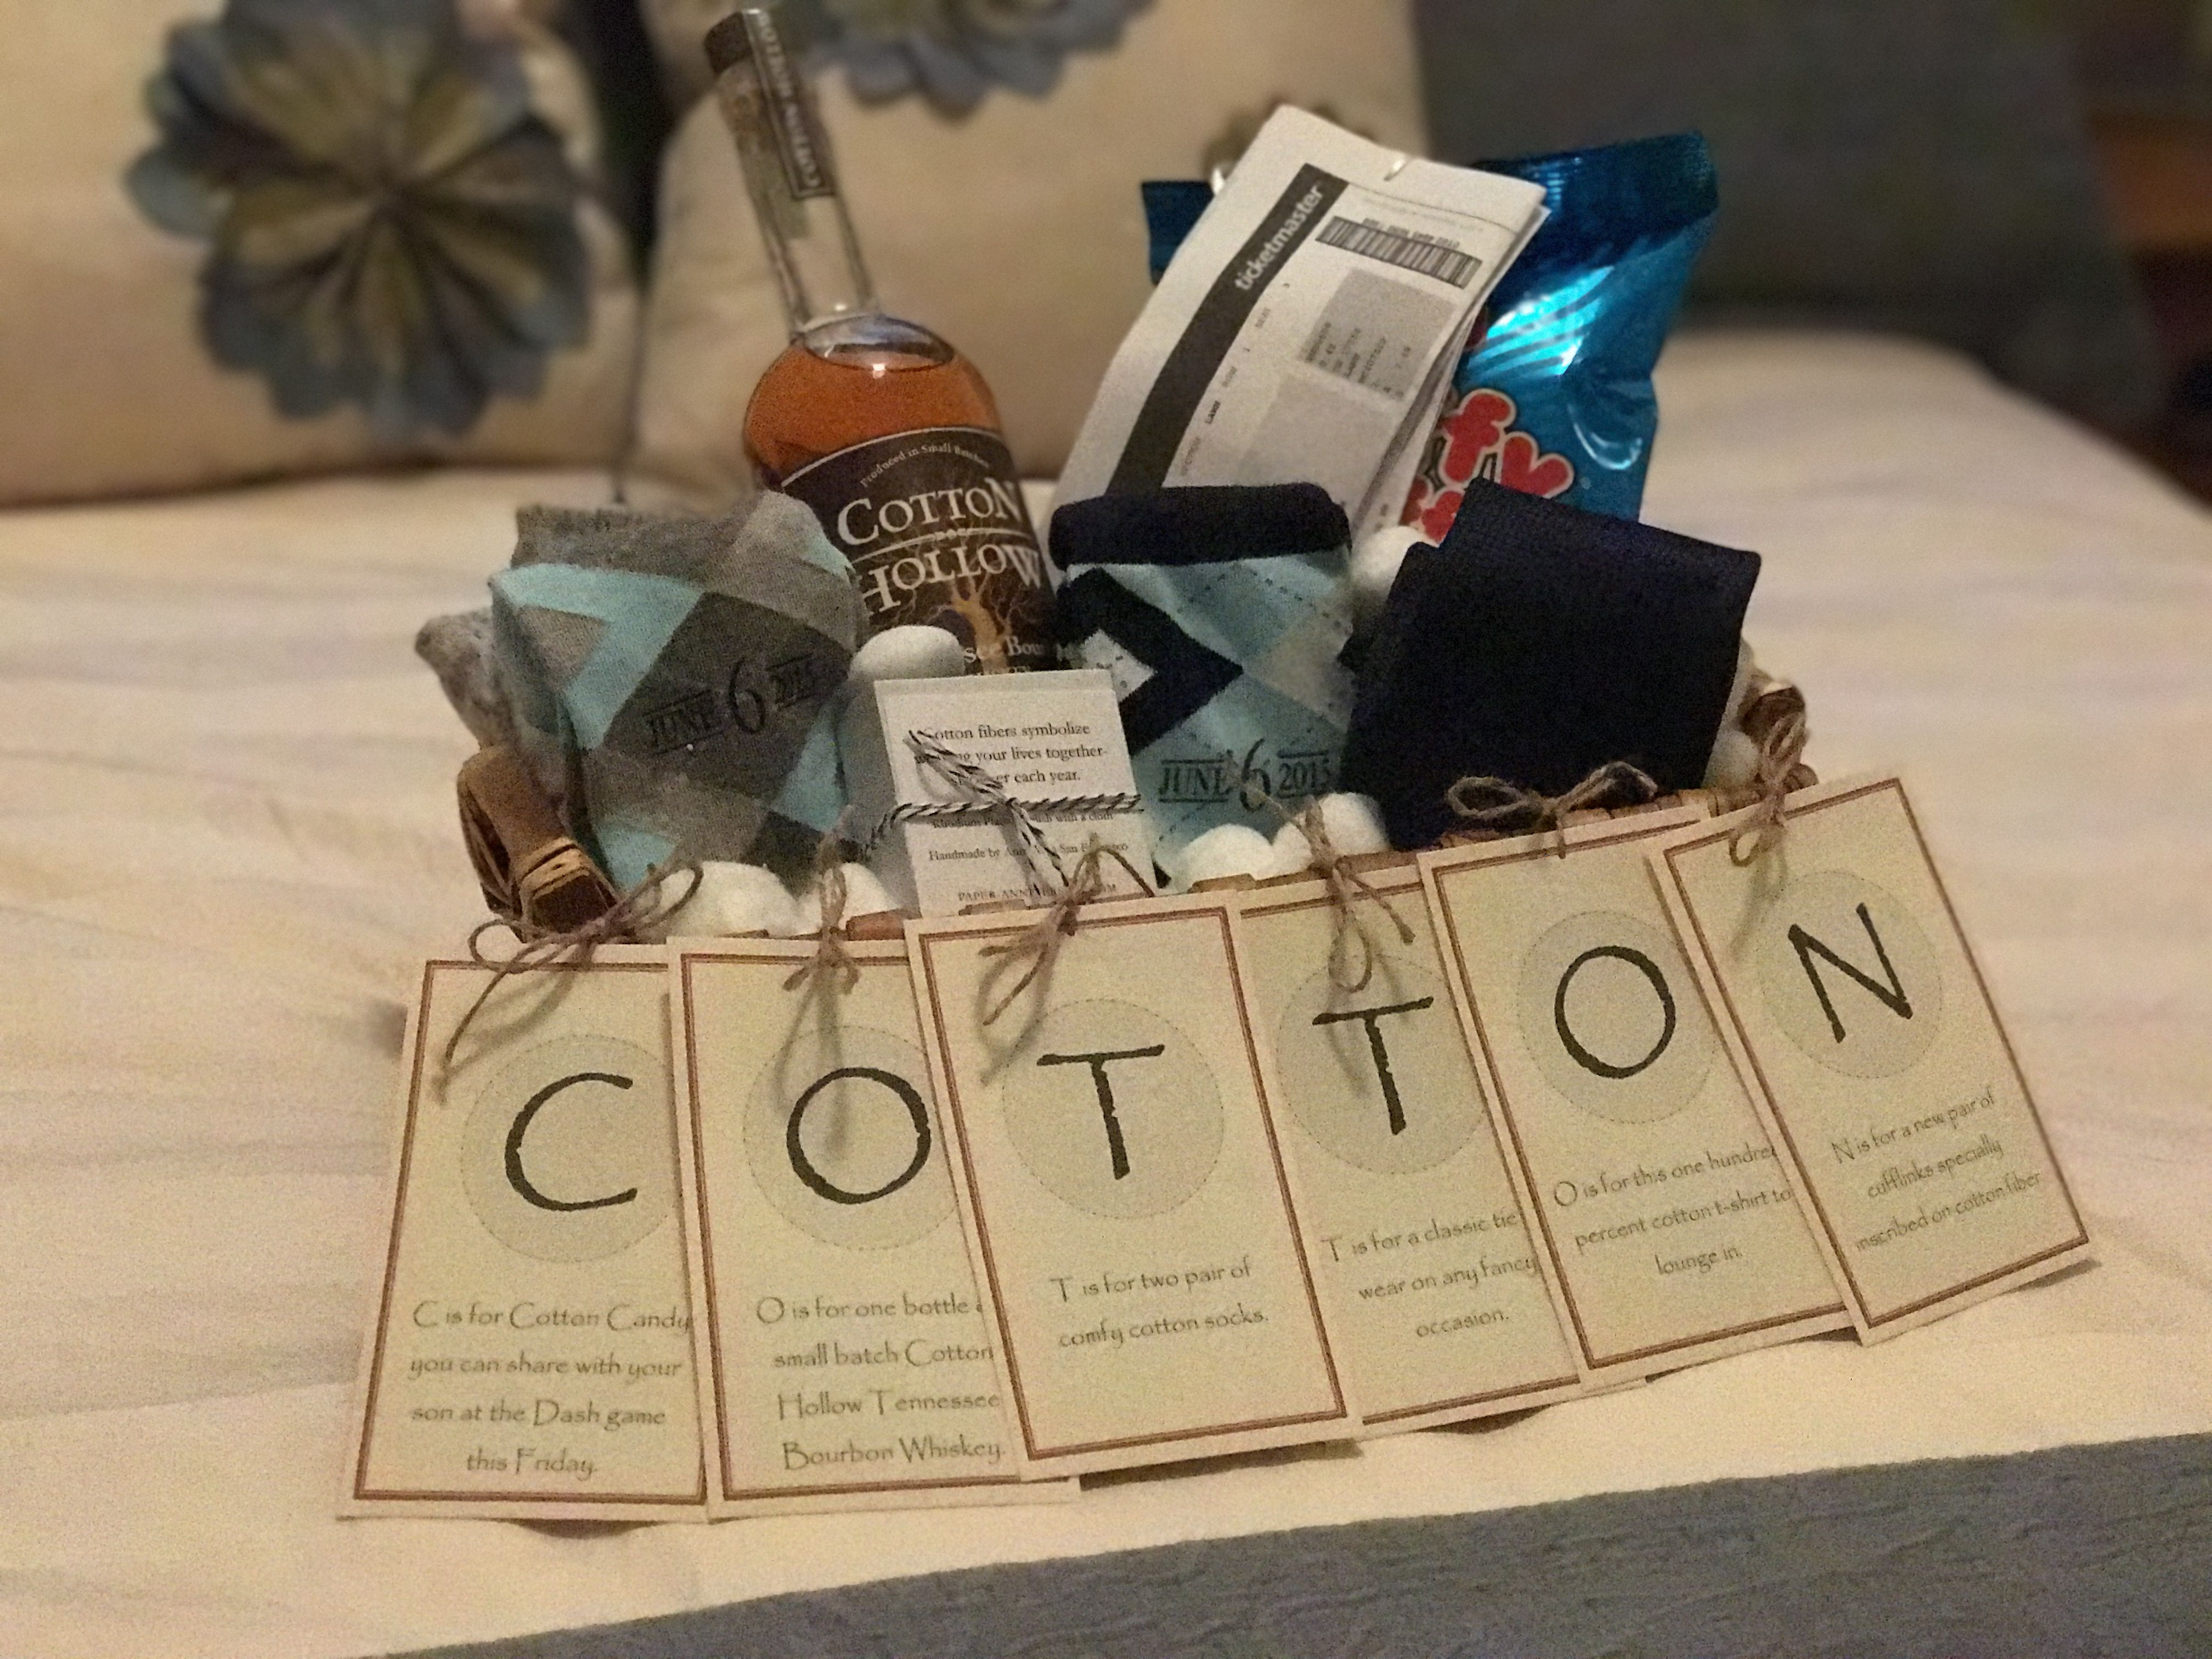 2Nd Wedding Gift Ideas
 The "Cotton" Anniversary Gift for Him